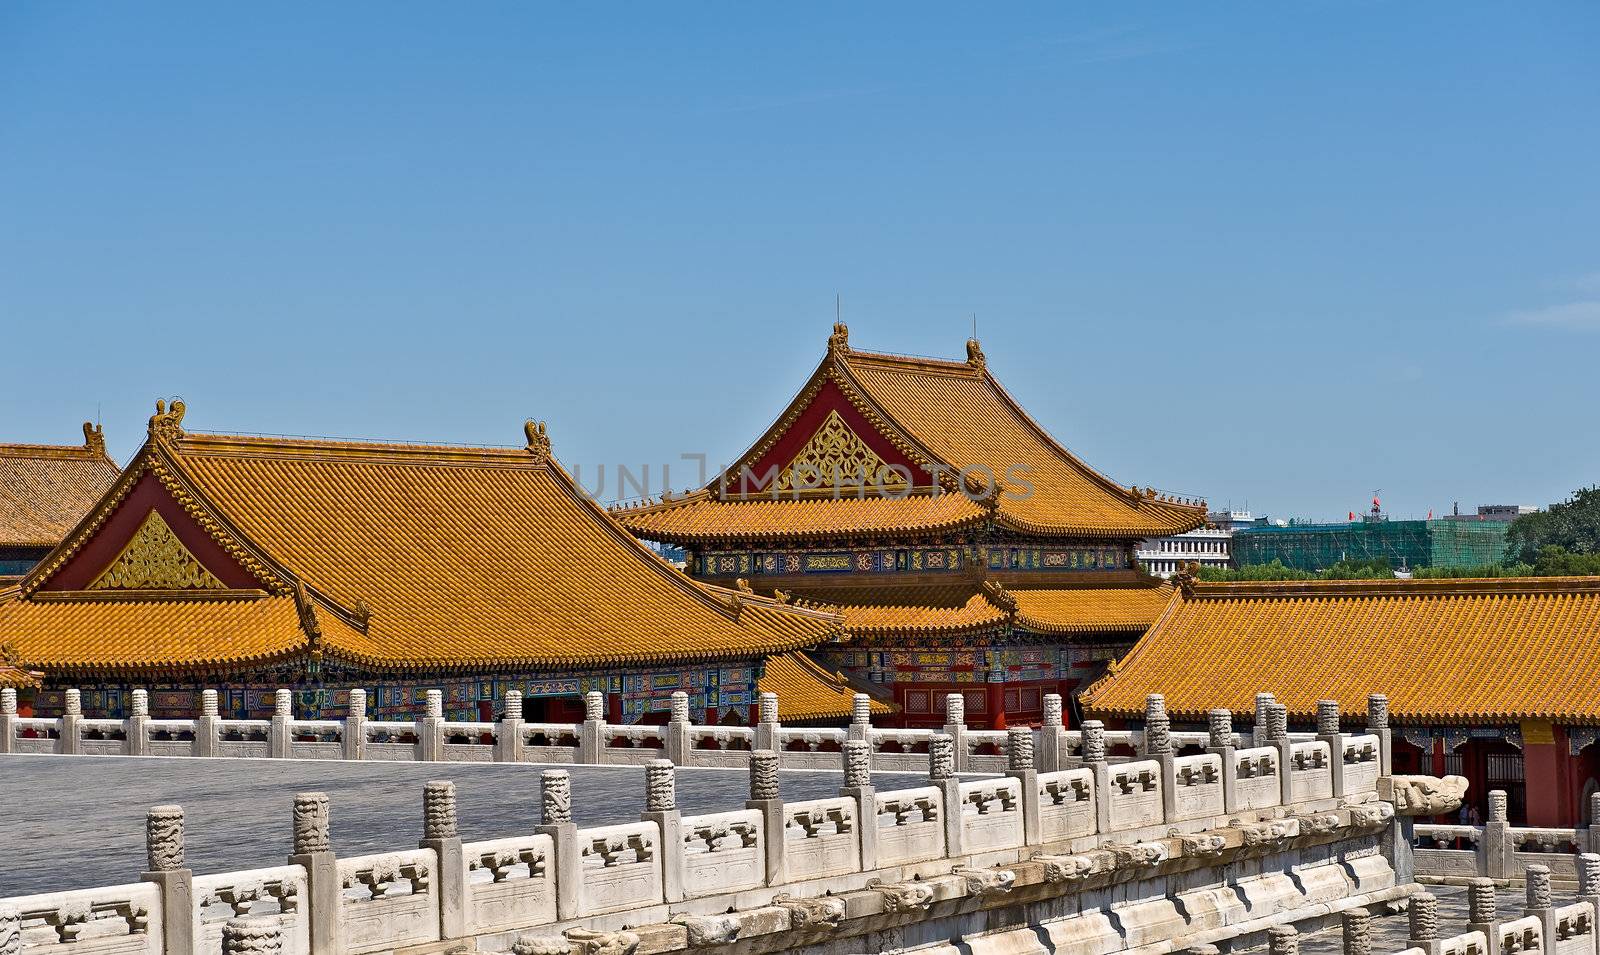 View of roofs in Forbidden City in Beijing, China